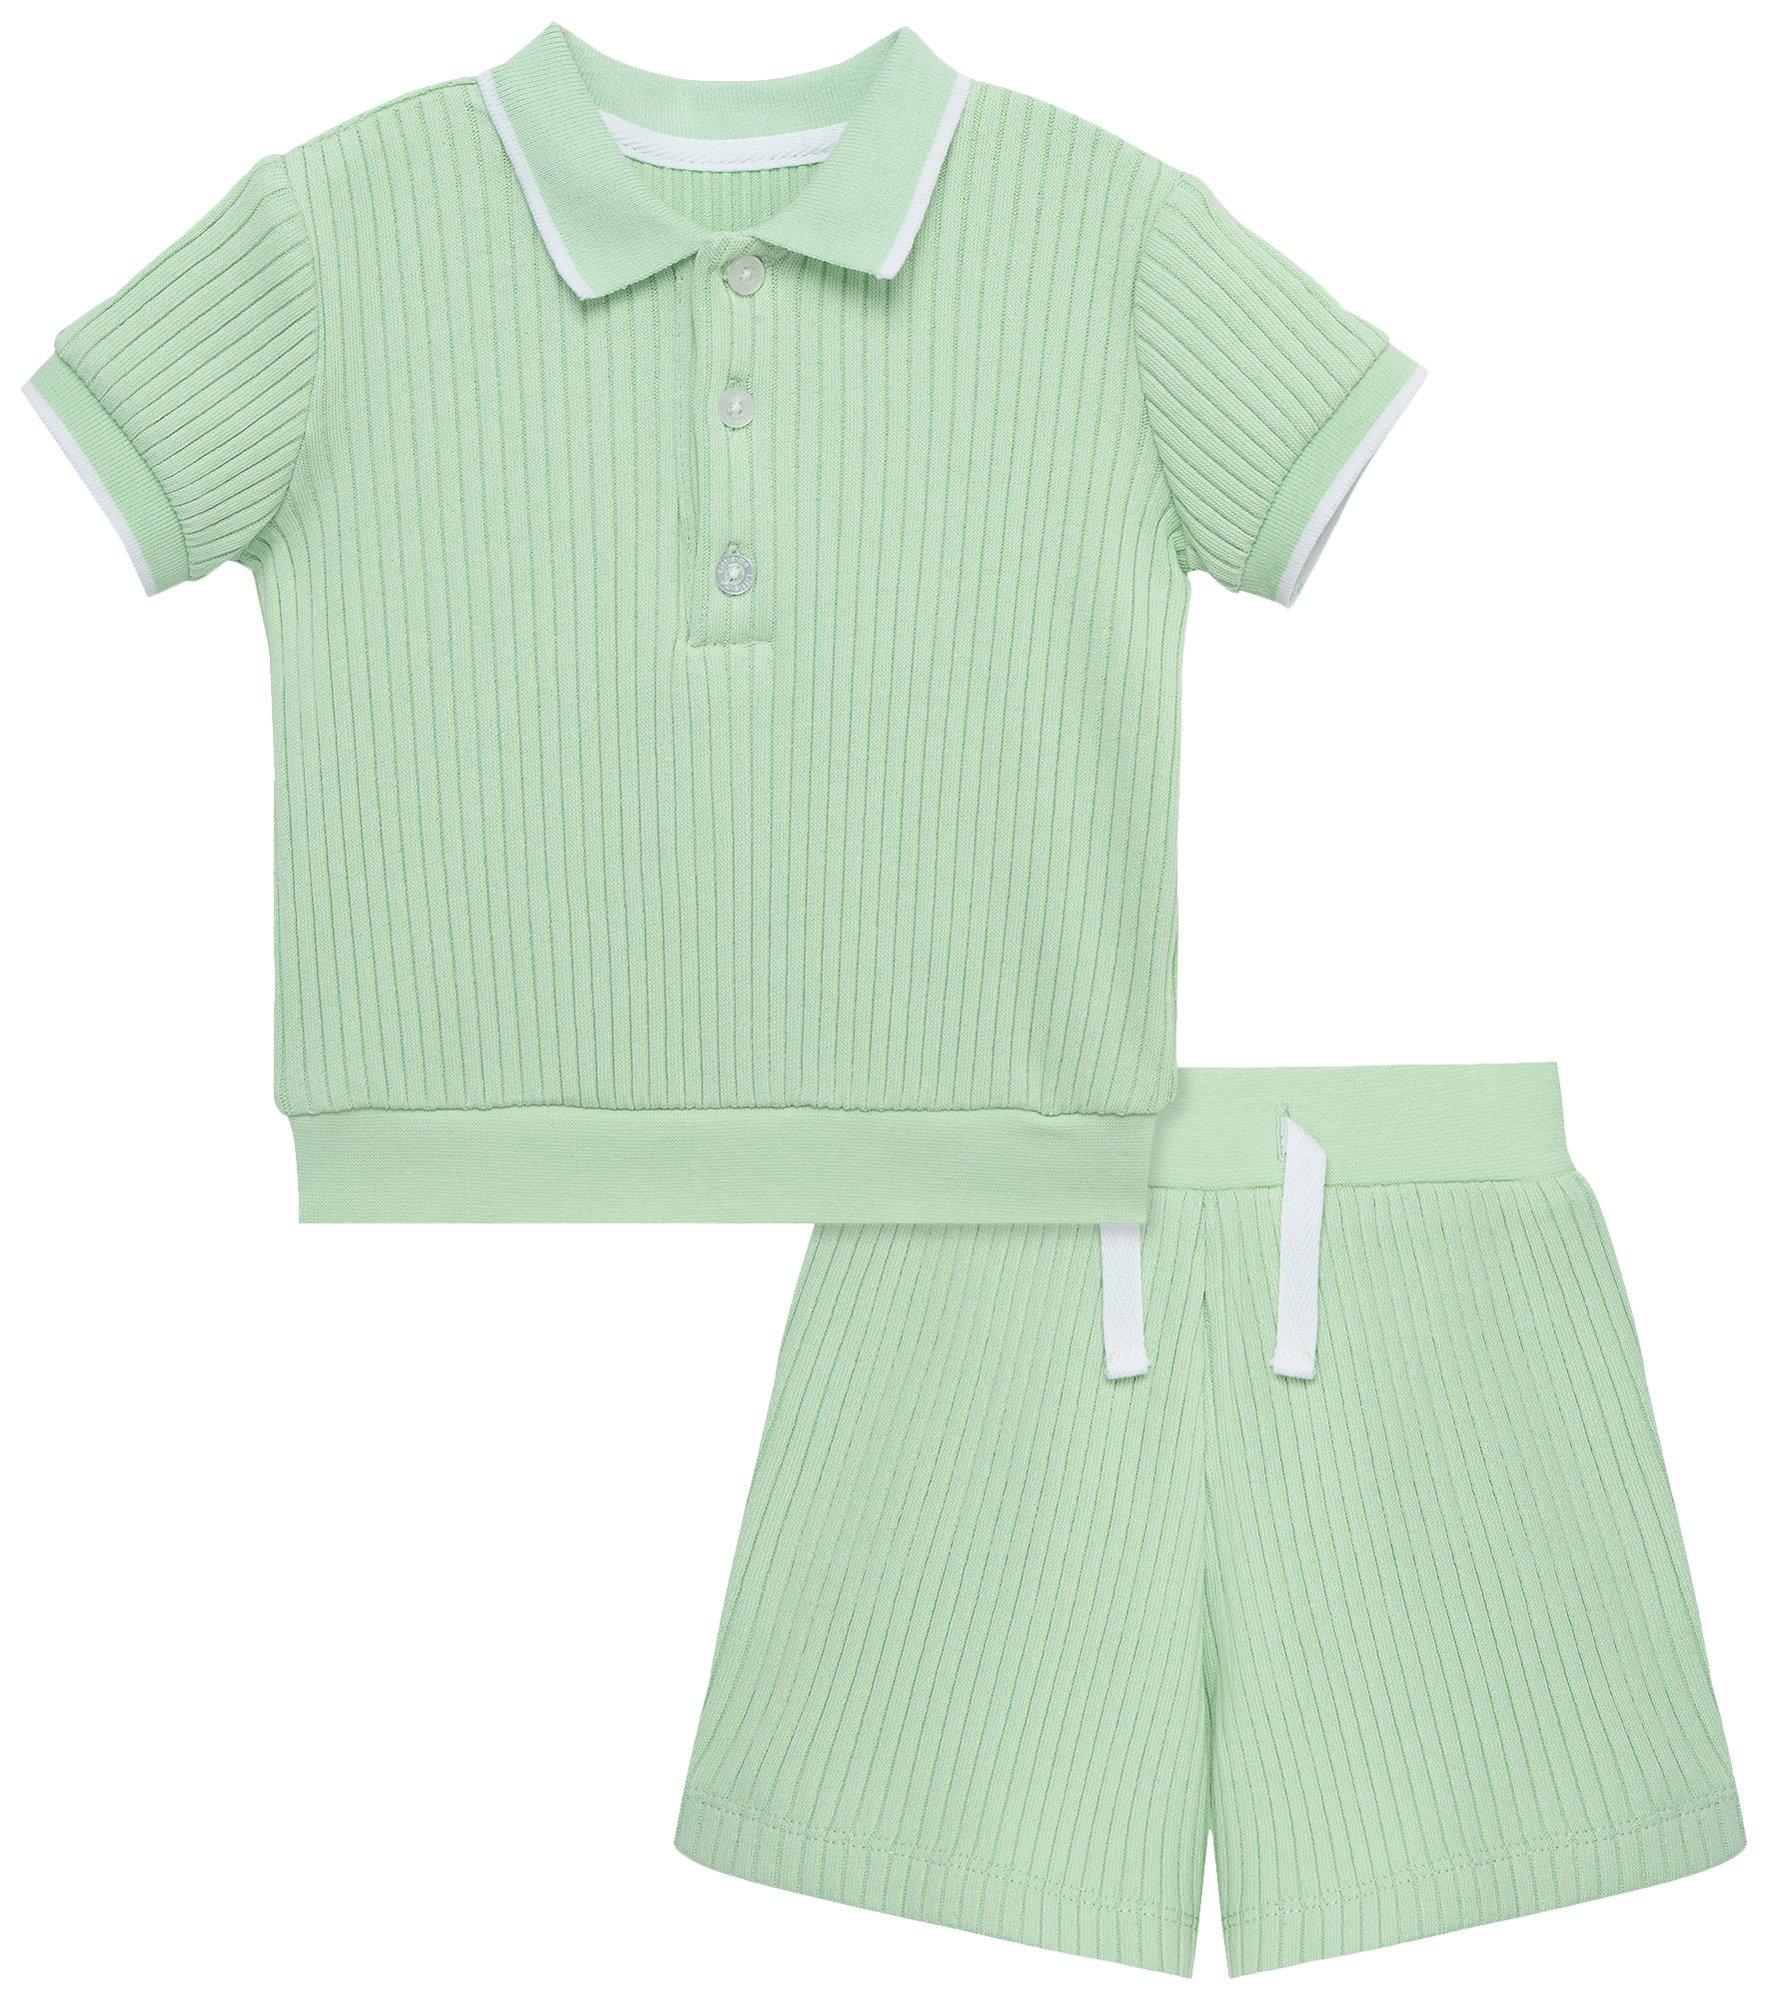 Baby Boys 2-pc. Top And Short Set